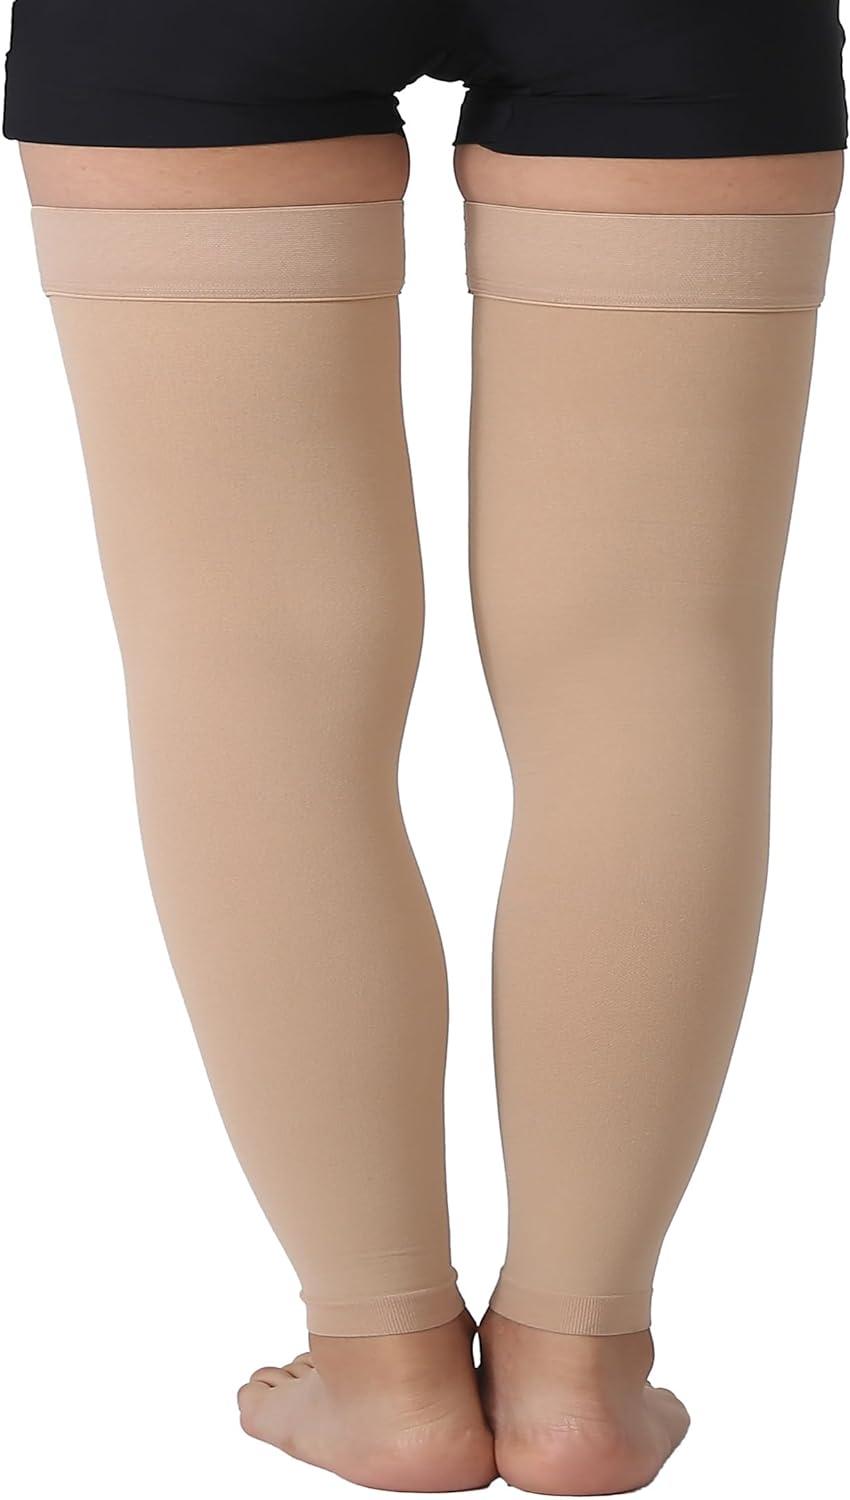 Compression Socks Leg Footless Varicose Veins Support Stockings